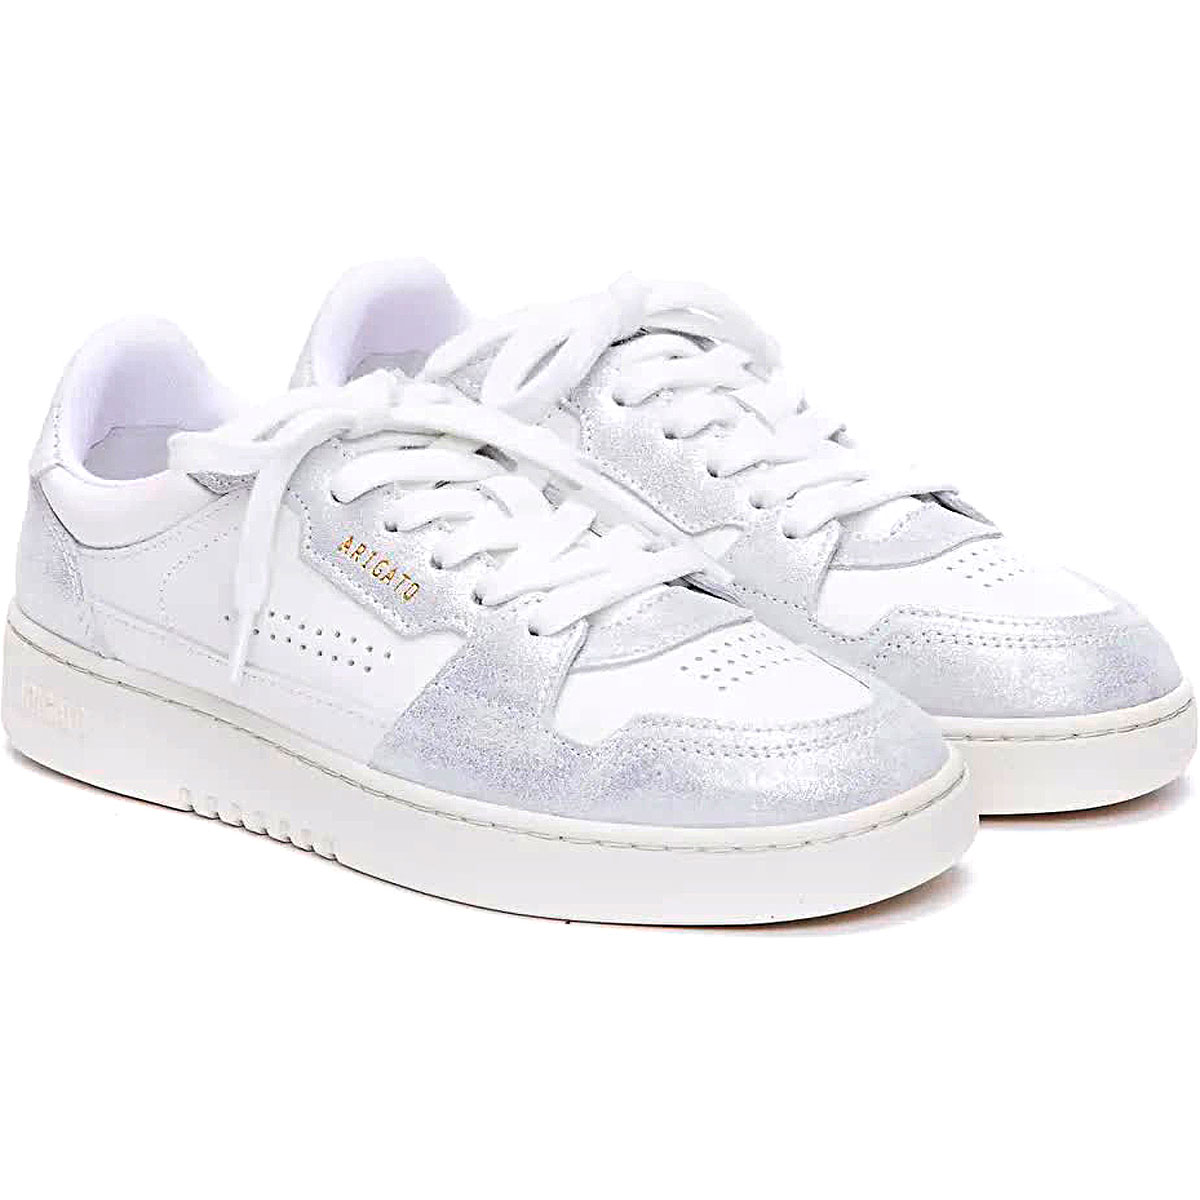 Womens Shoes Axel Arigato, Style code: f1308001-whitesilver-